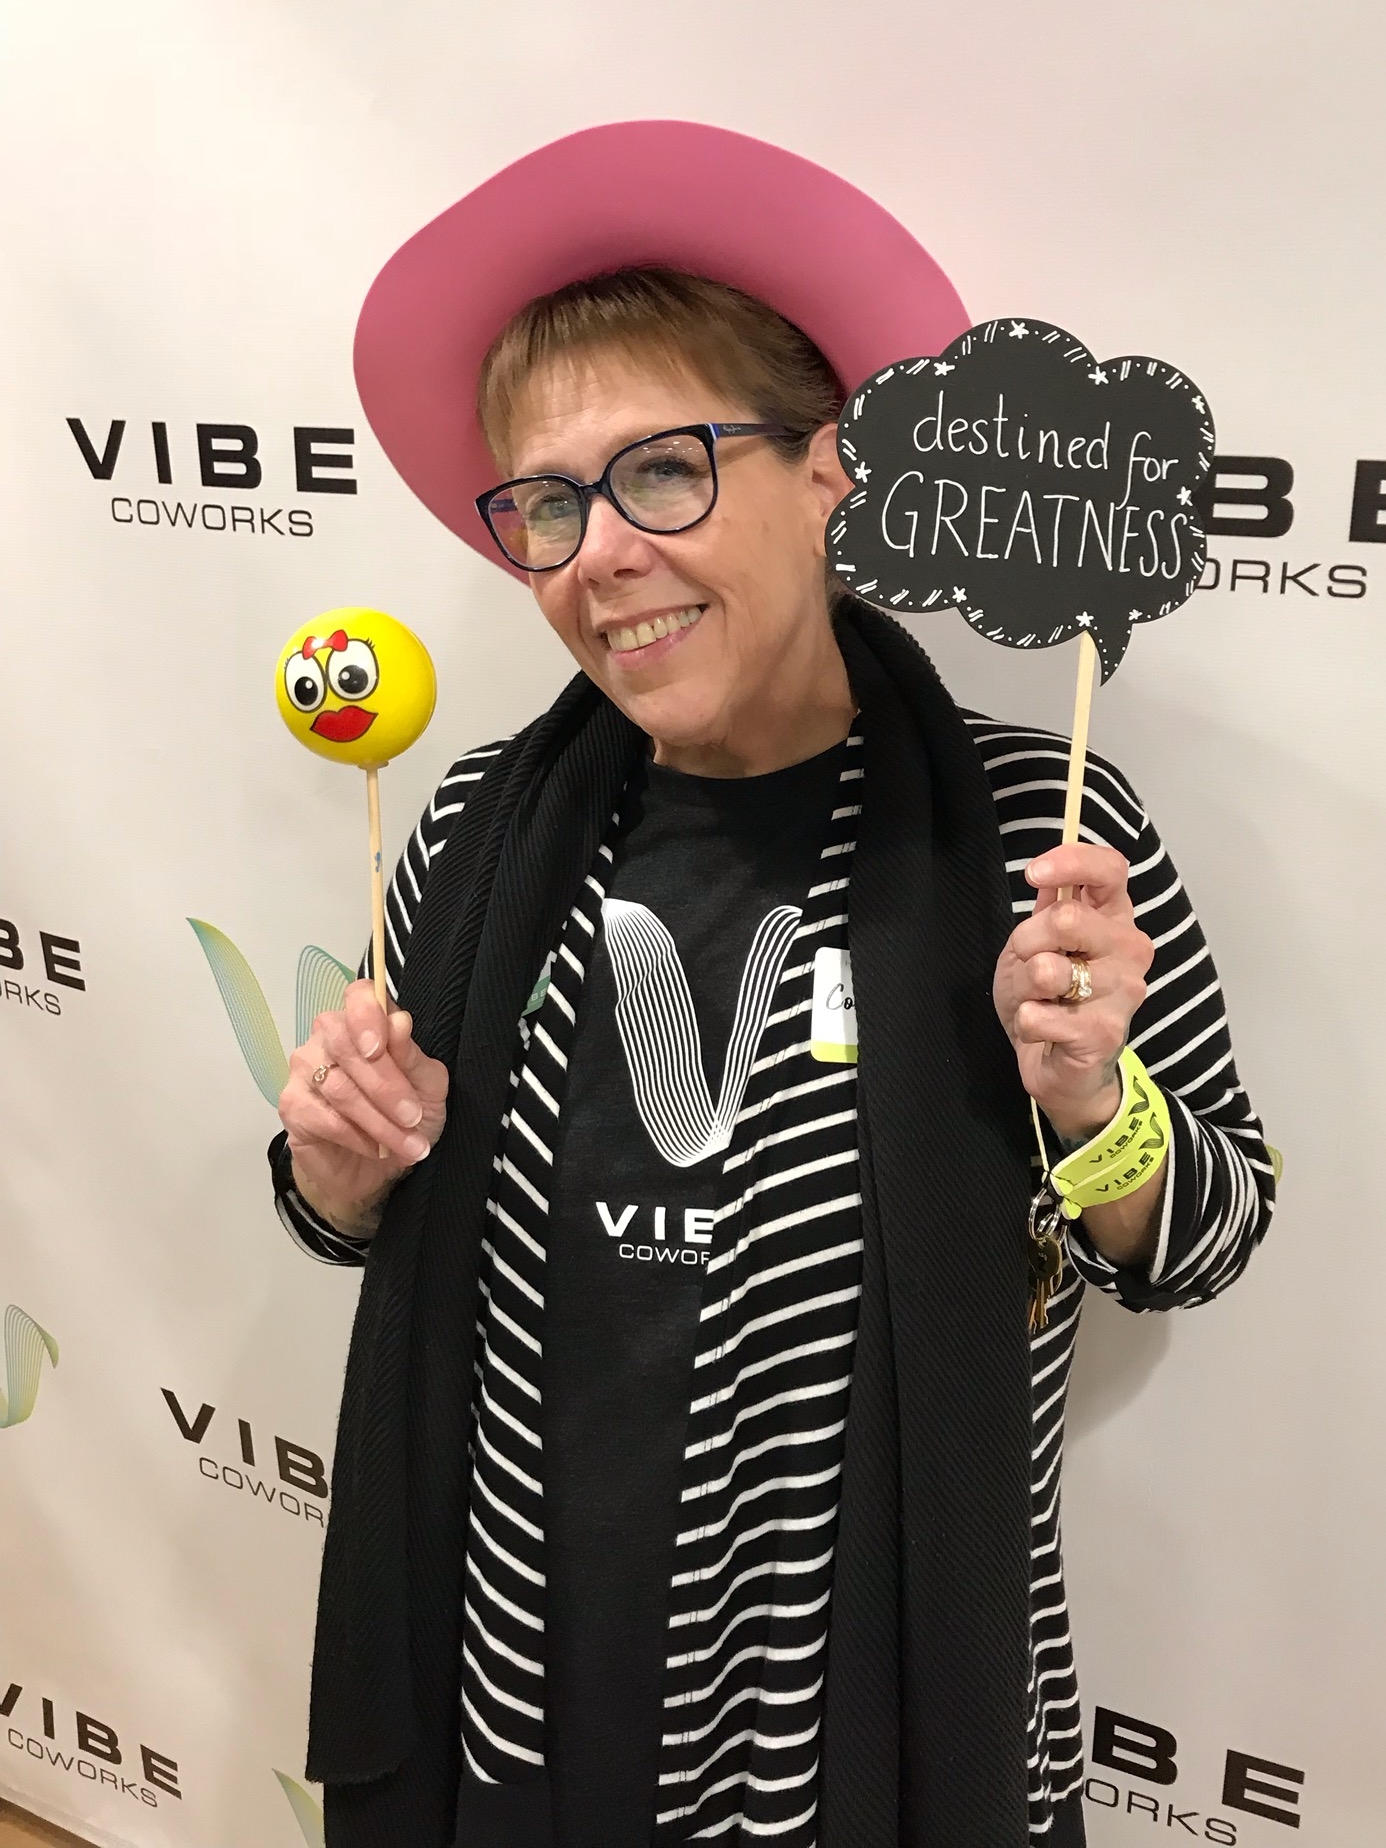 Vibist Mary Mason believes that life is a gift to be celebrated, expressed, cherished and honored. Having spent 8 years doing counseling in a private practice, she now describes herself as “one of the life coaches you might actually have fun talking…